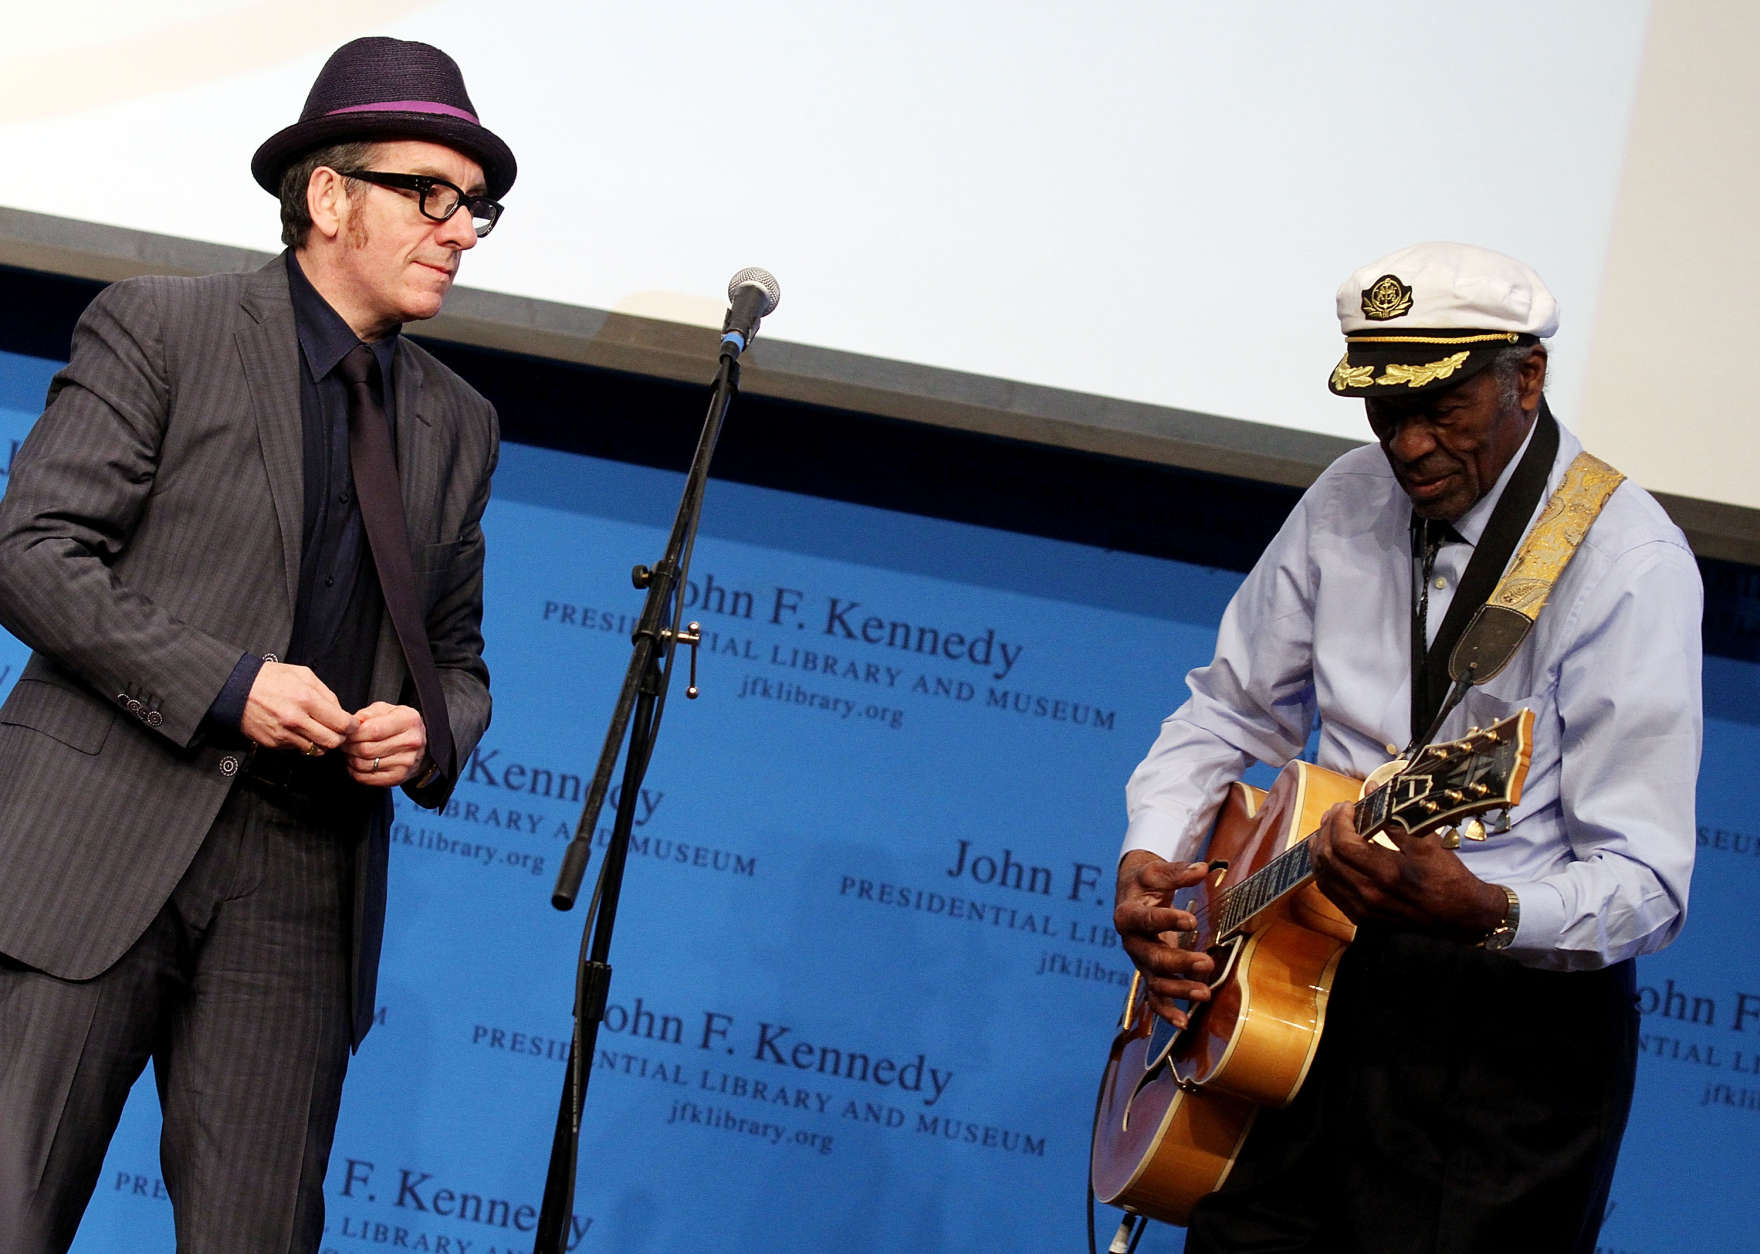 Boston, MA - FEBRUARY 26: Elvis Costello watches at honoree Chuck Berry performs during the 2012 Awards for Lyrics of Literary Excellence at The John F. Kennedy Presidential Library And Museum on February 26, 2012 in Boston, Massachusetts. (Photo by Marc Andrew Deley/Getty Images)